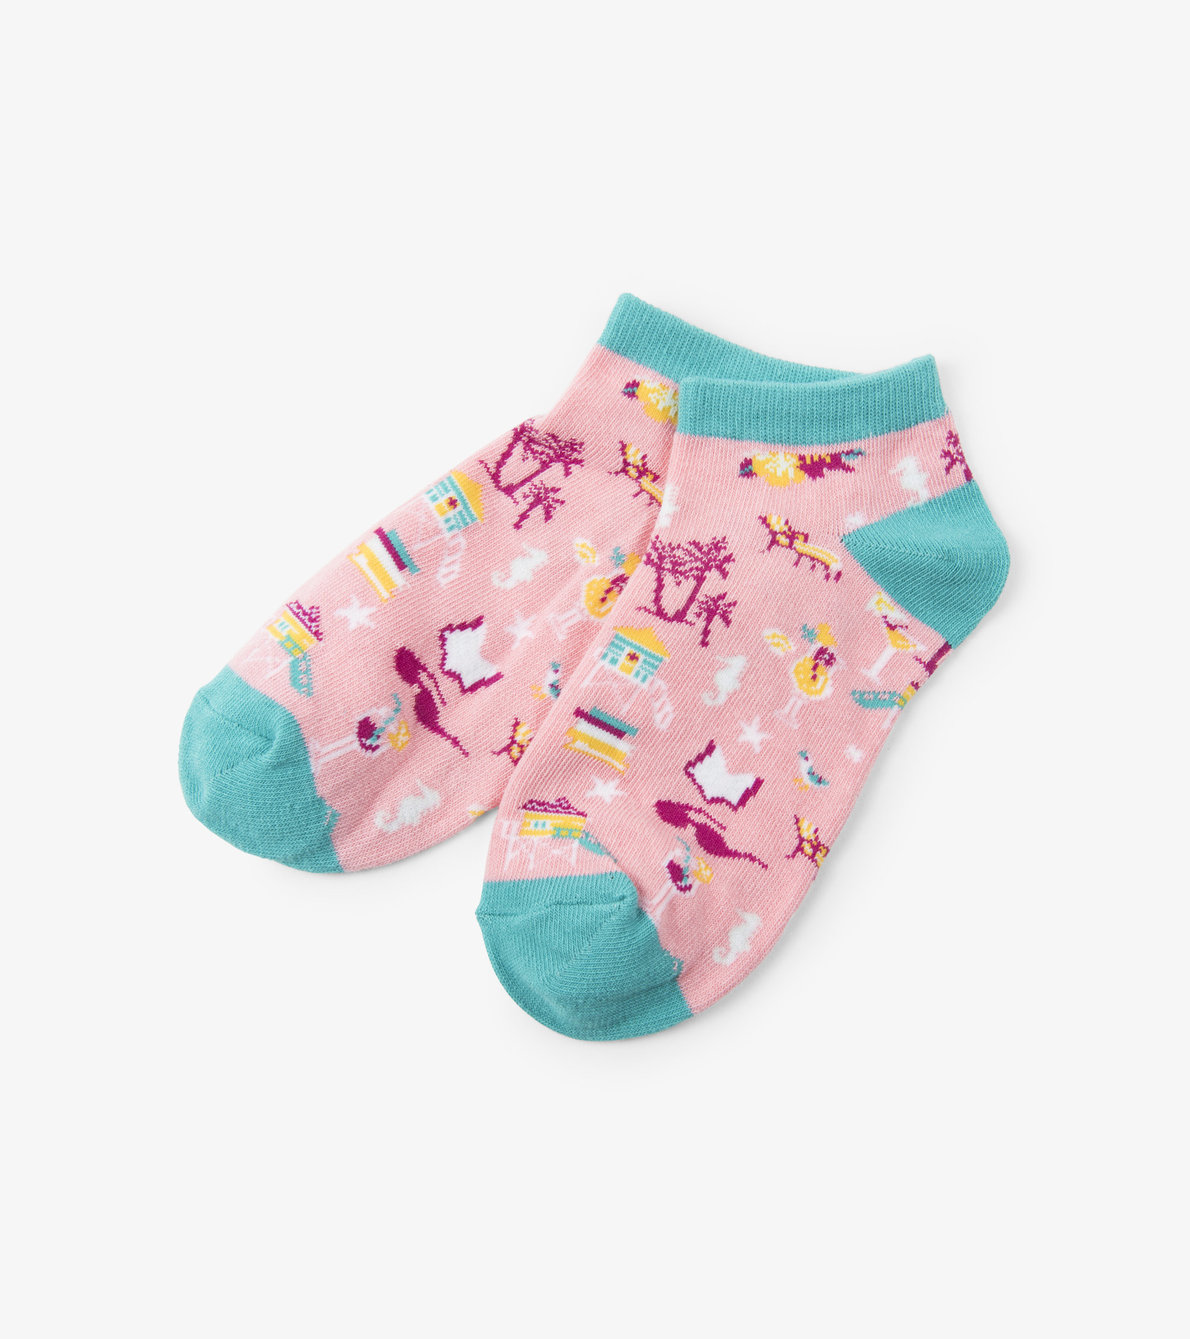 View larger image of Beach House Women's Ankle Socks